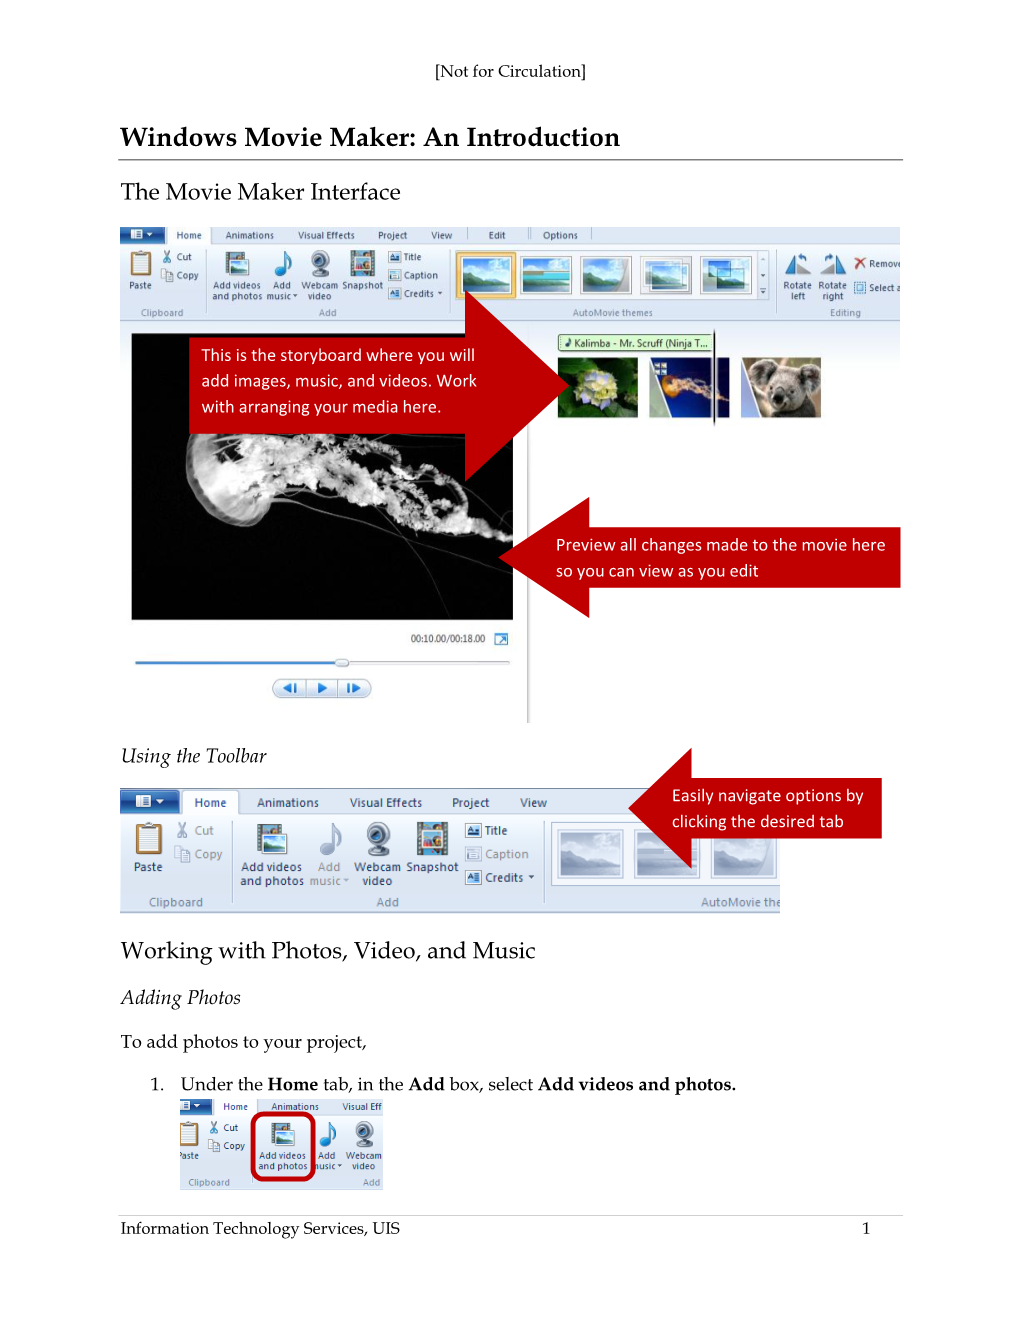 Windows Movie Maker: an Introduction